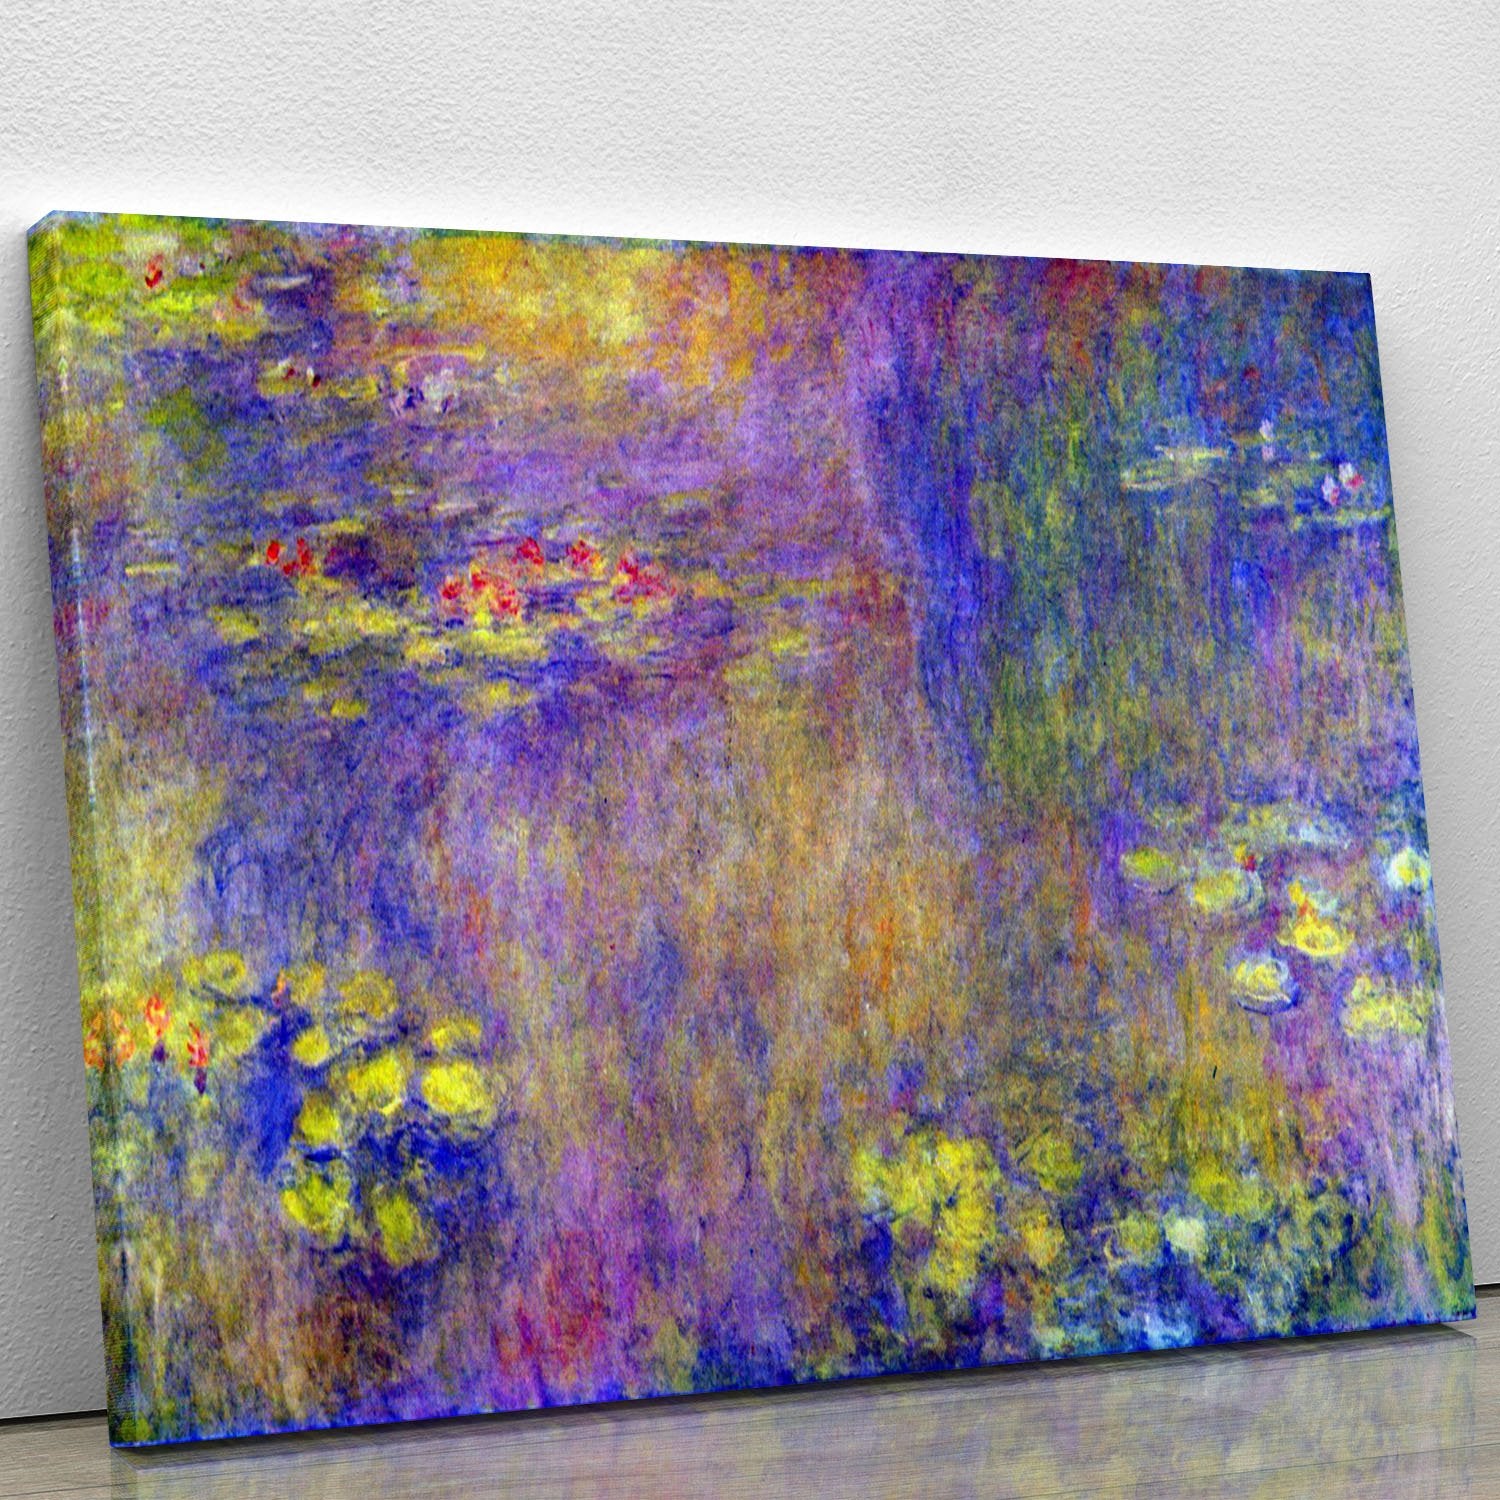 Water Lilies Yellow nirvana by Monet Canvas Print or Poster